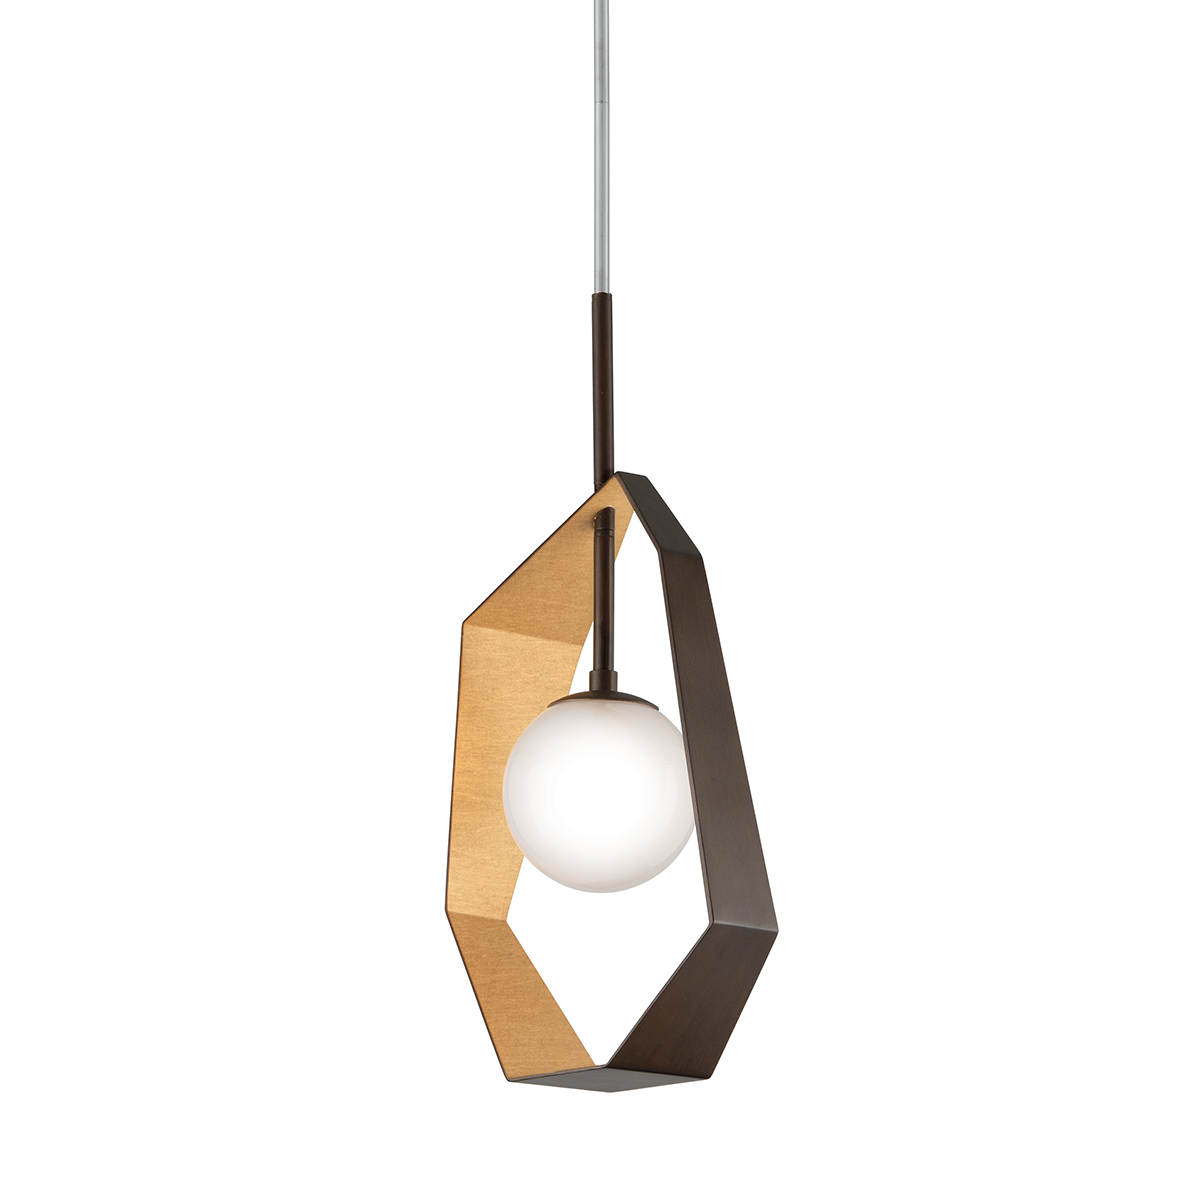 Troy Lighting Origami Pendant Pendant Troy Lighting BRONZE WITH GOLD LEAF 6x11.75x24 